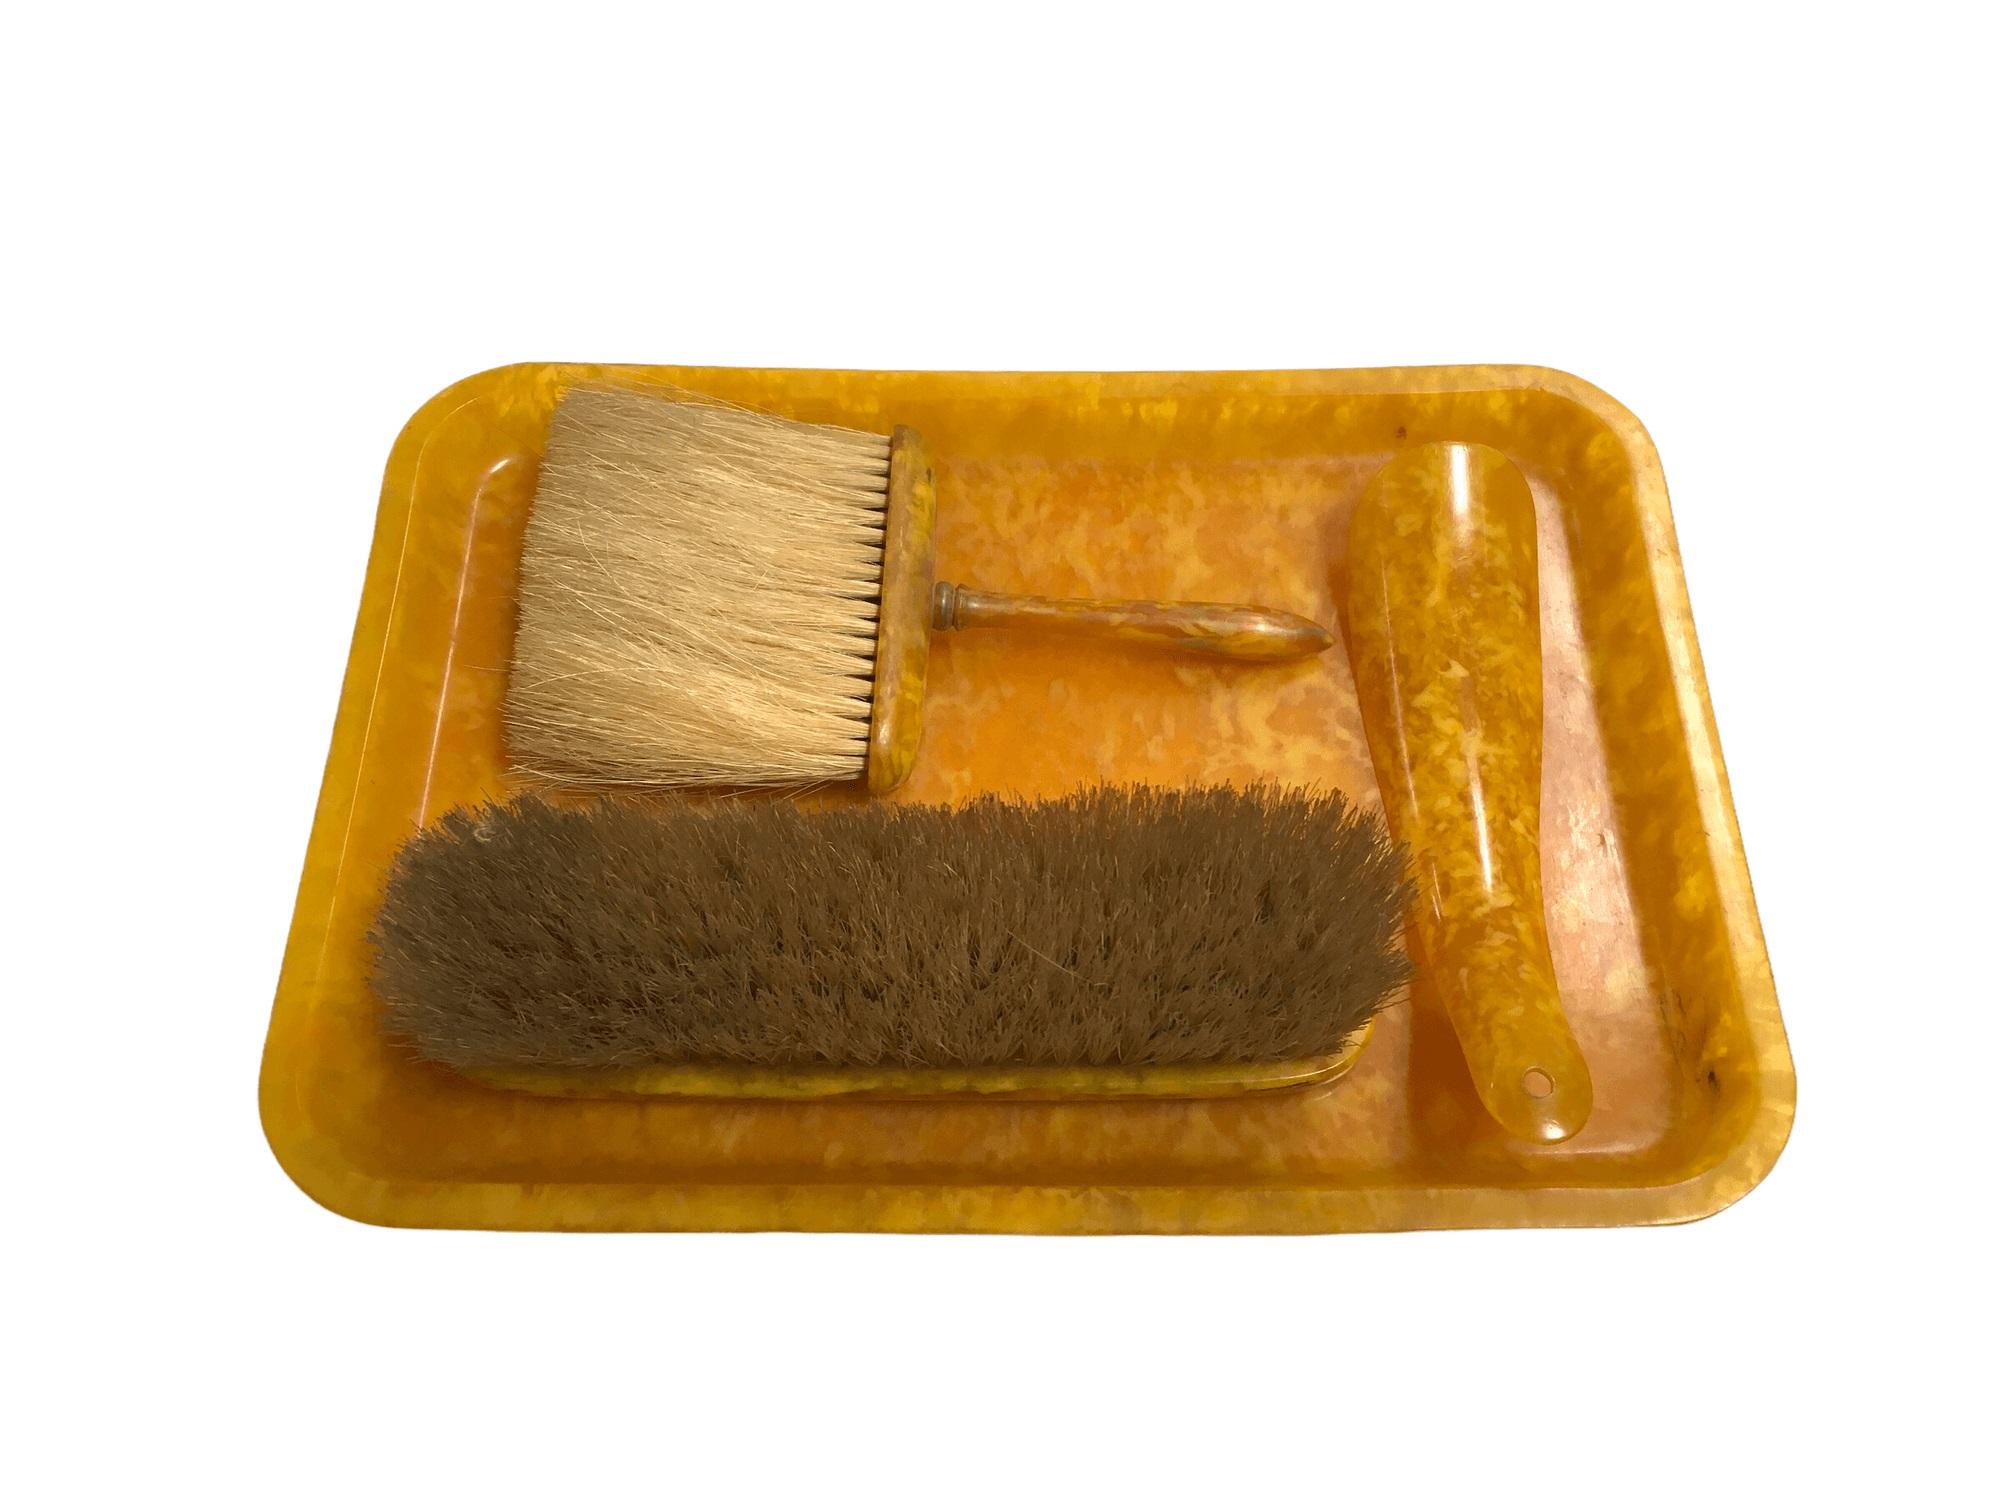 Vintage Celluloid Vanity Set with Tray, Clothing Brush, Hat Brush, and Shoe Horn.
 
Every single piece in this set is in great condition. Made out of bakelite, it features a nice marbled yellow-orange pattern. Slight signs of use, but no dents,